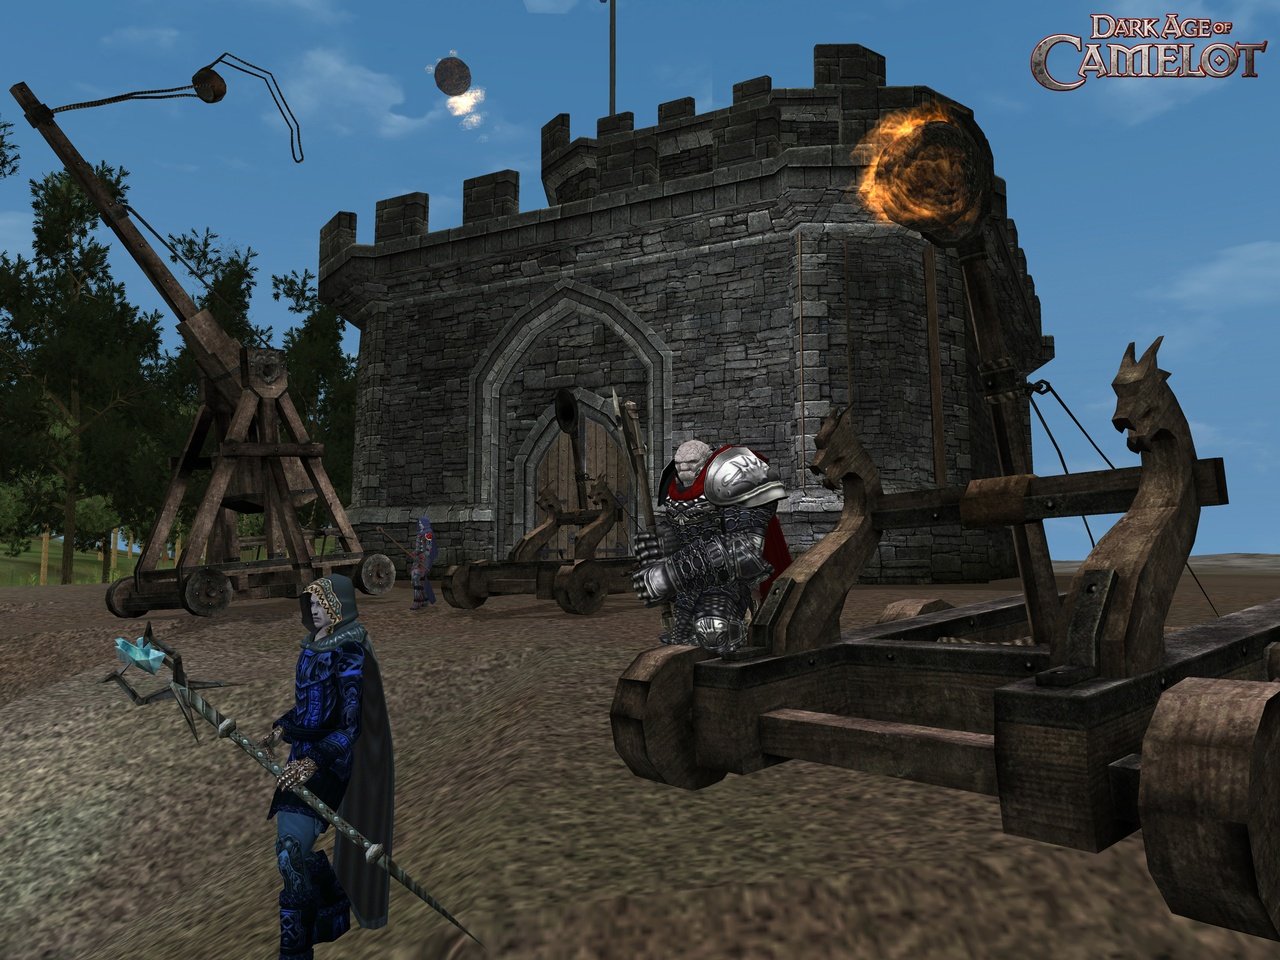 dark age of camelot download for mac